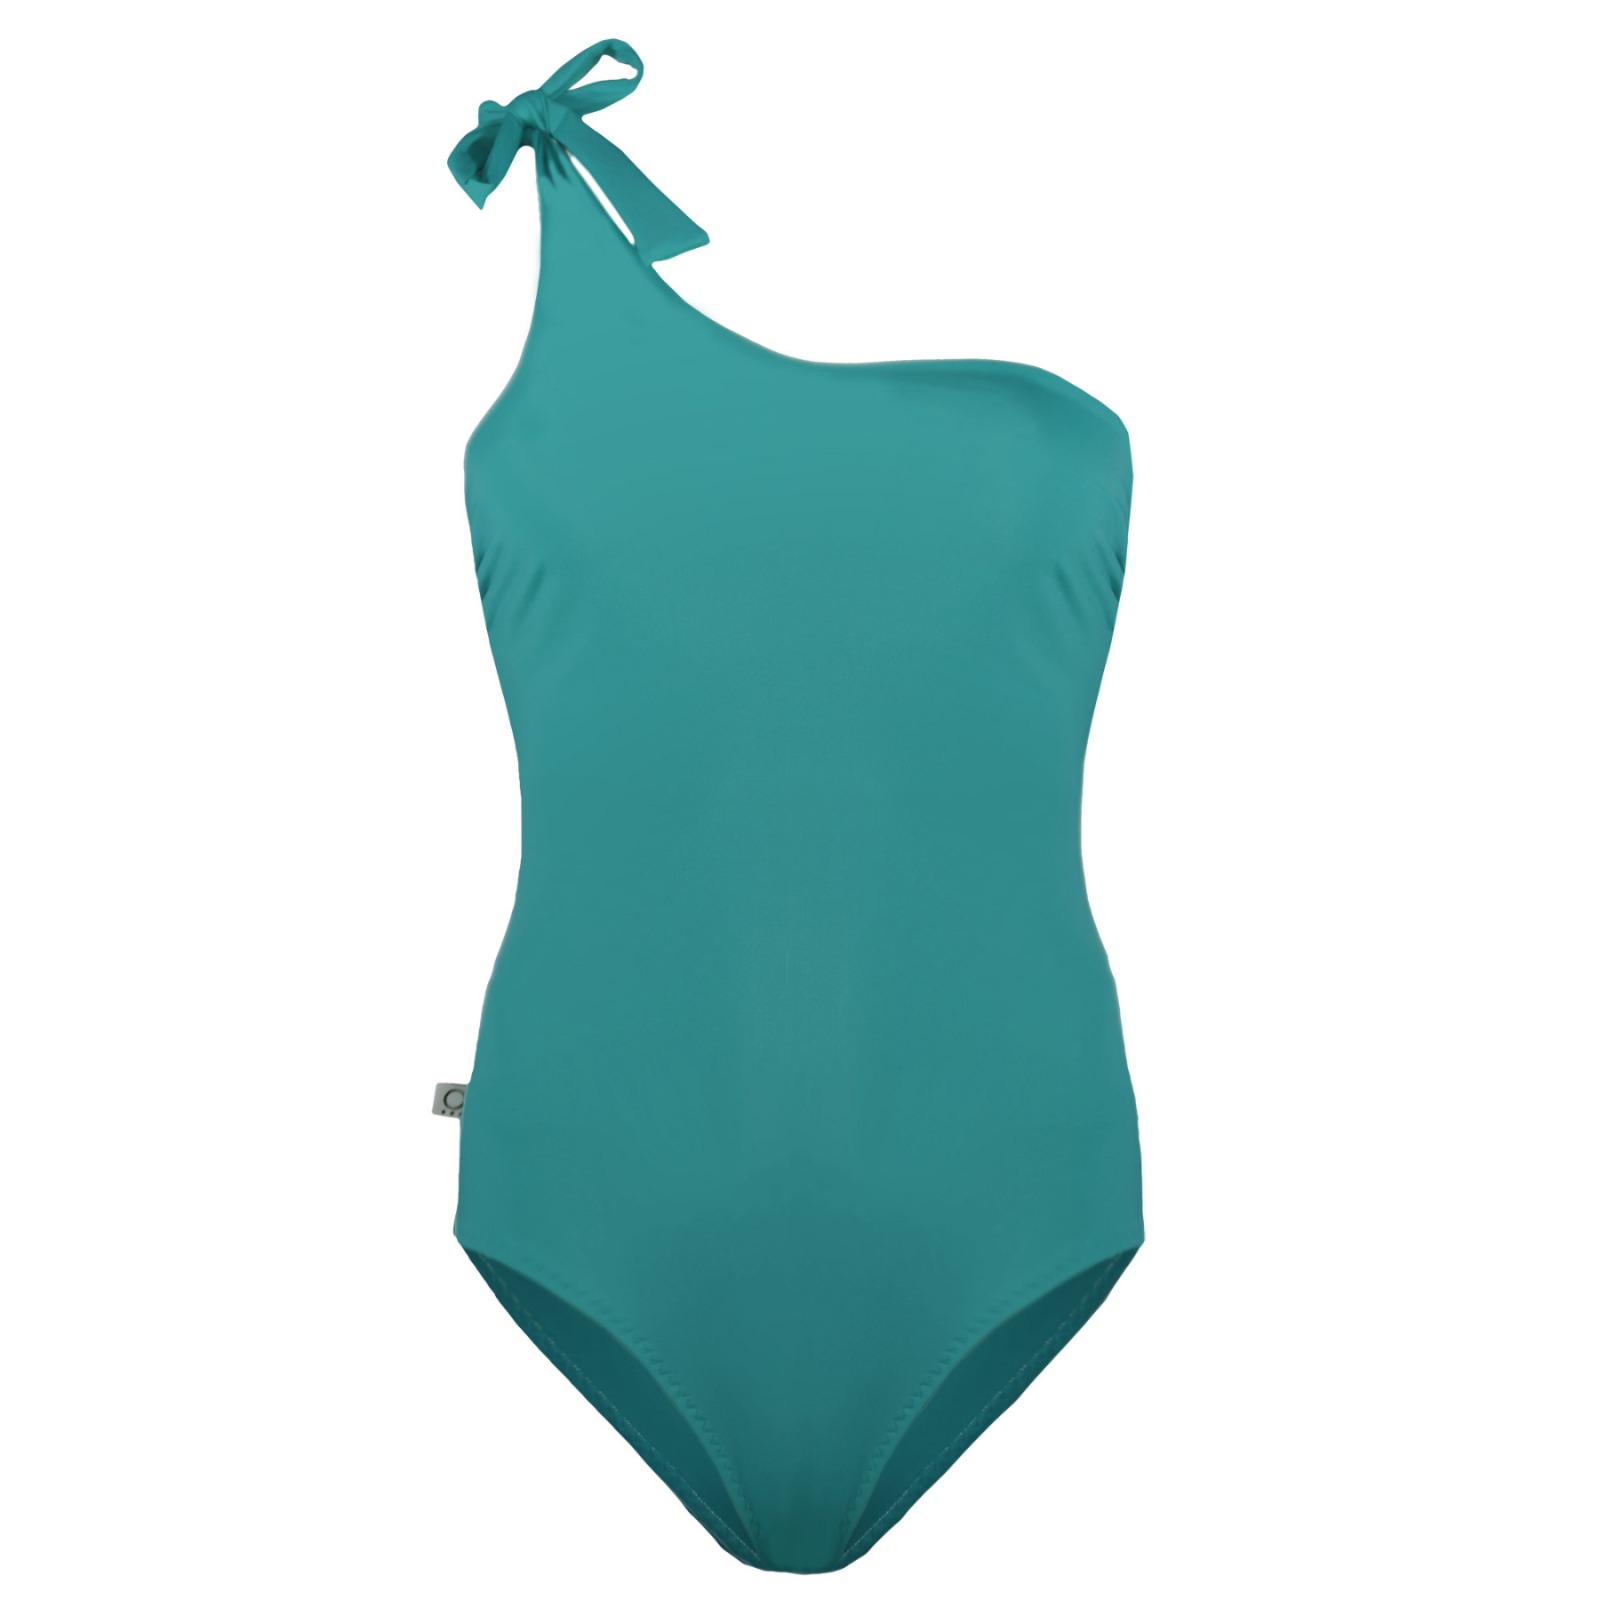 Recycling swimsuit Acacia smaragd green